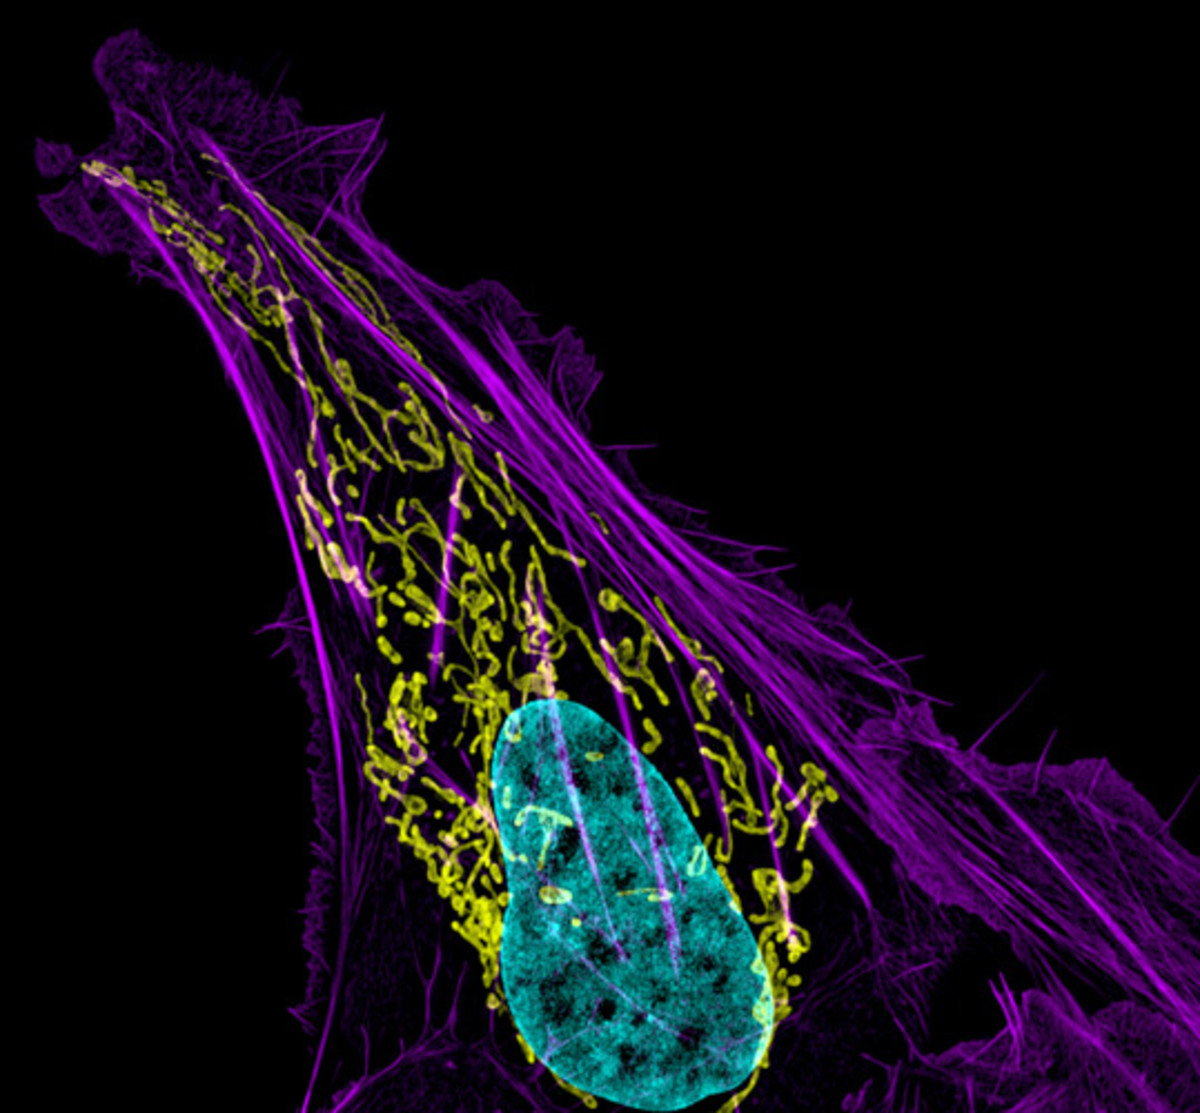 Osteosarcoma cell (bone cancer) showing actin filaments (purple), mitochondria (yellow), and DNA (blue) in an U2OS cell (63x)- NIGMS, NICHD, National Institutes of Health.